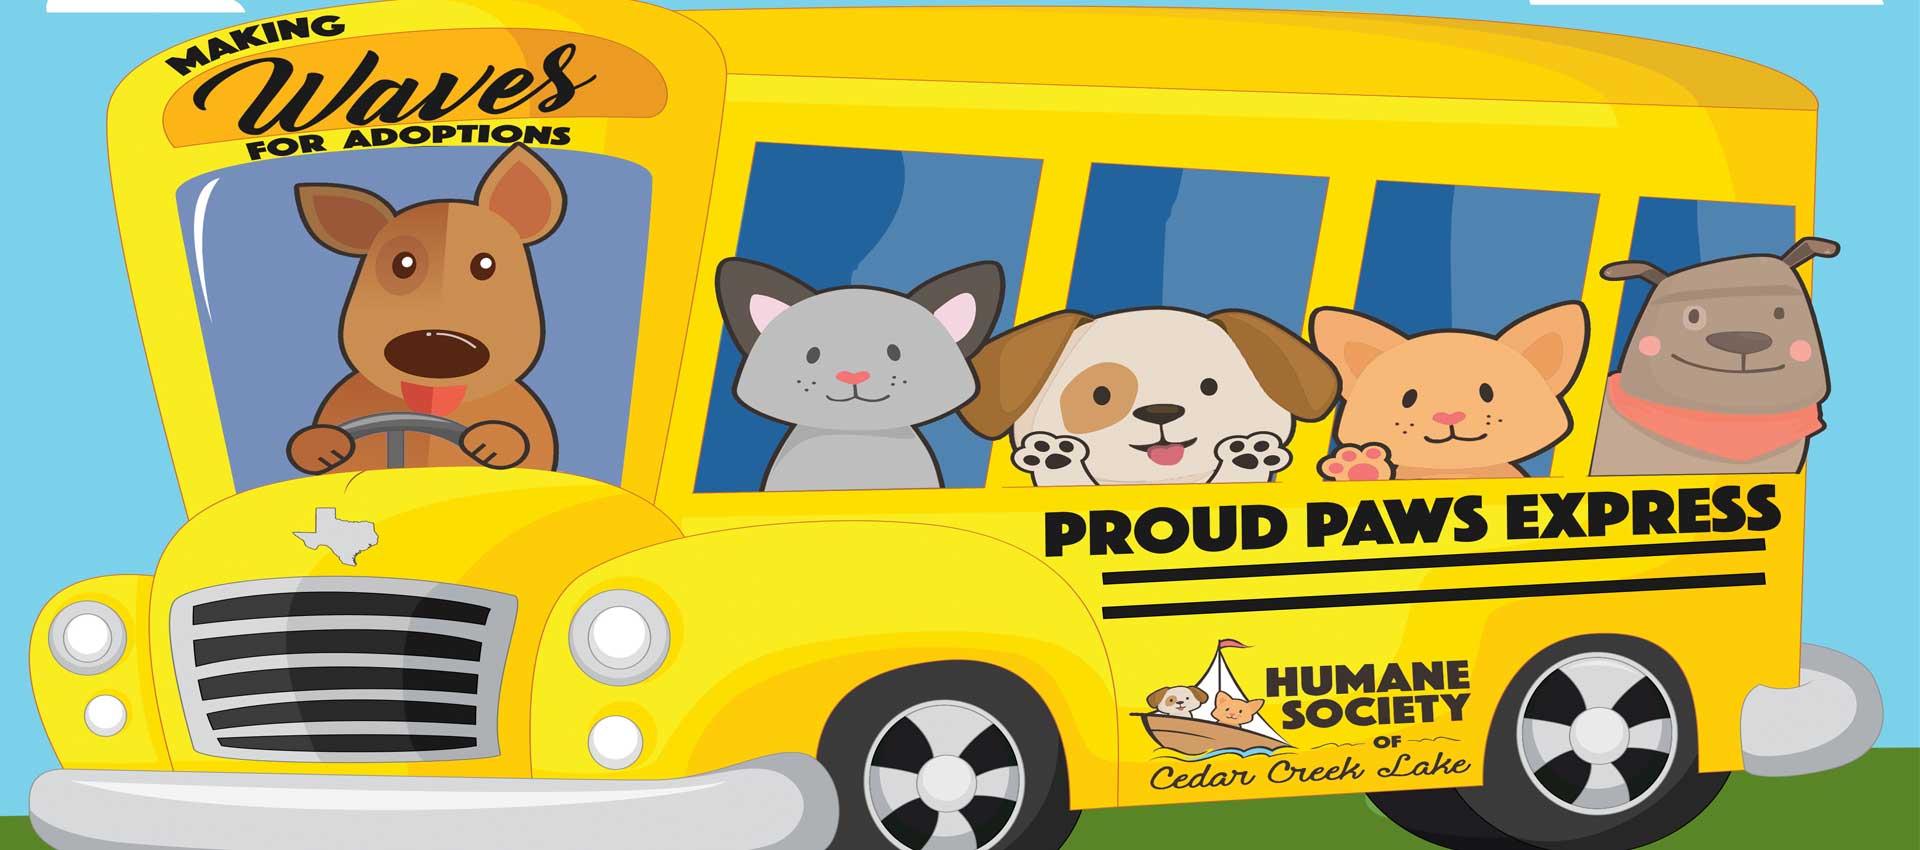 Gallery Proud Paws Express